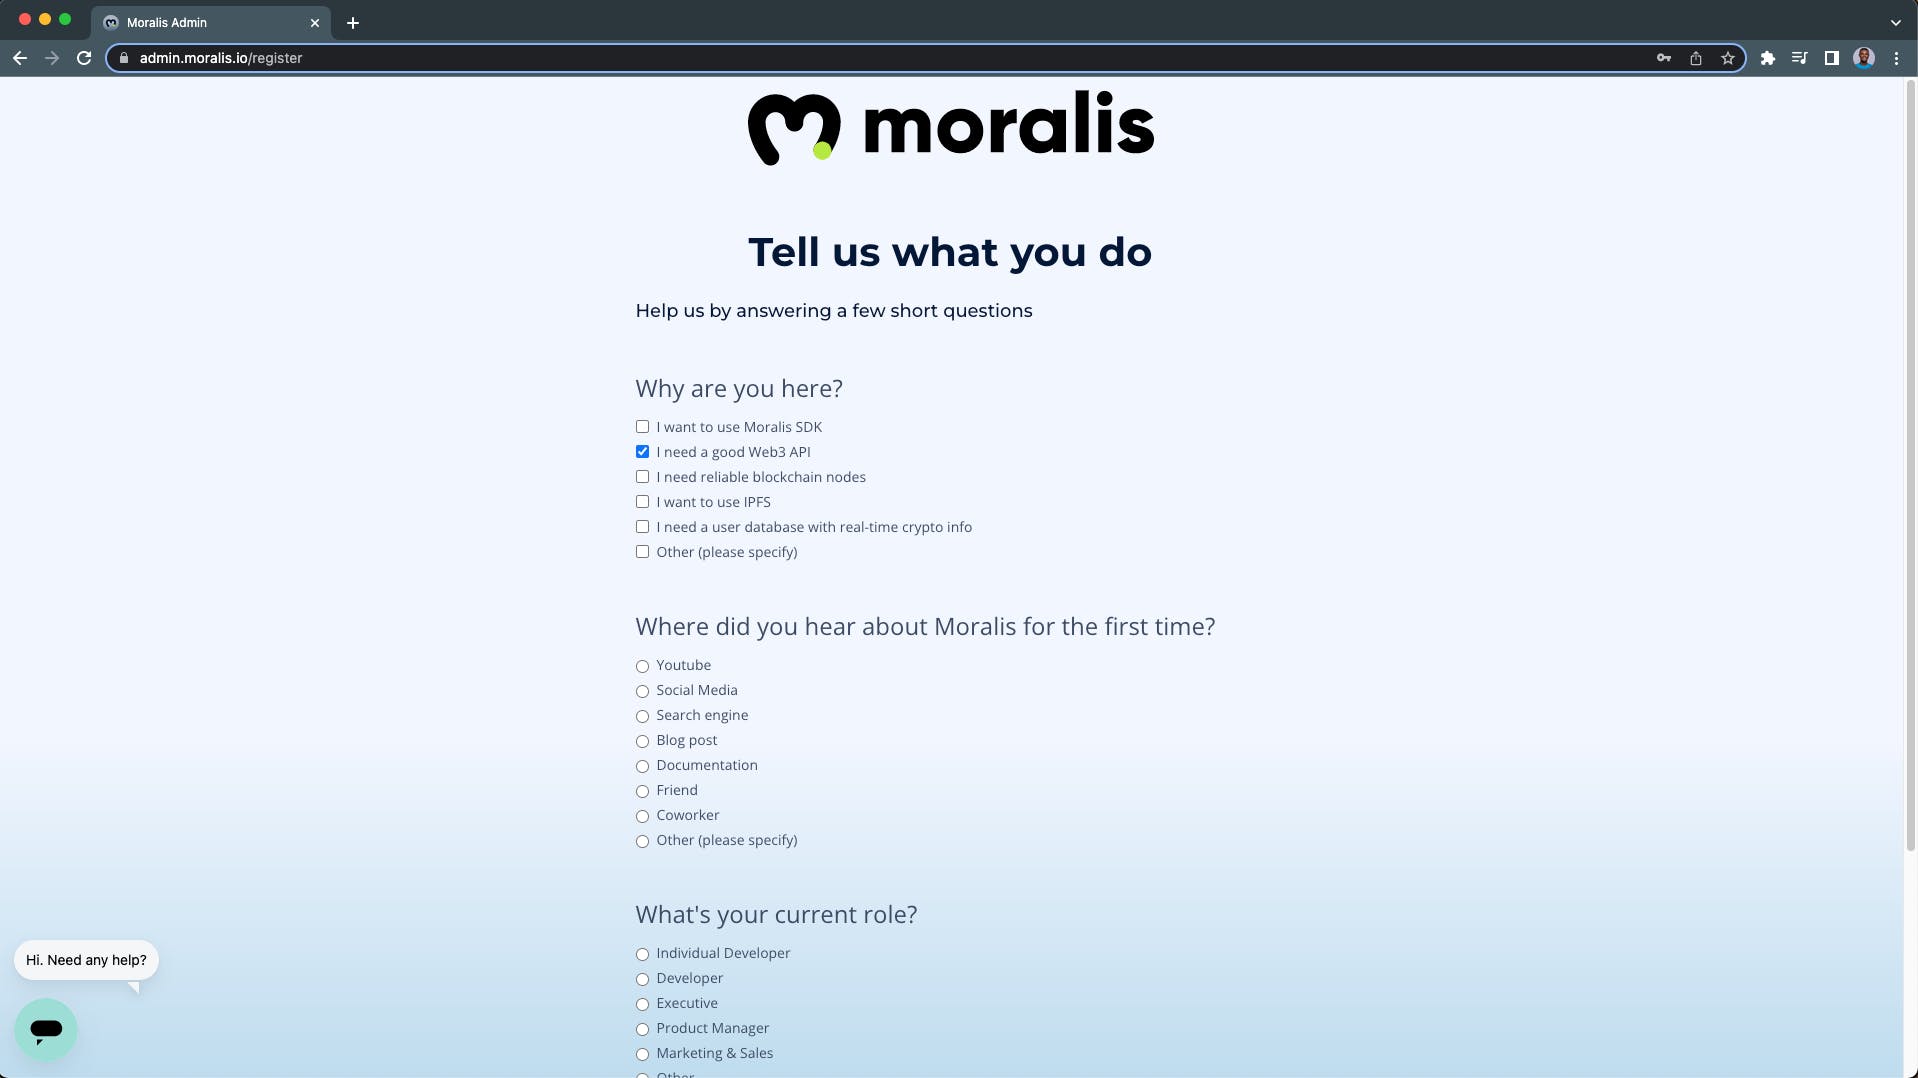 Moralis is requesting survey questions